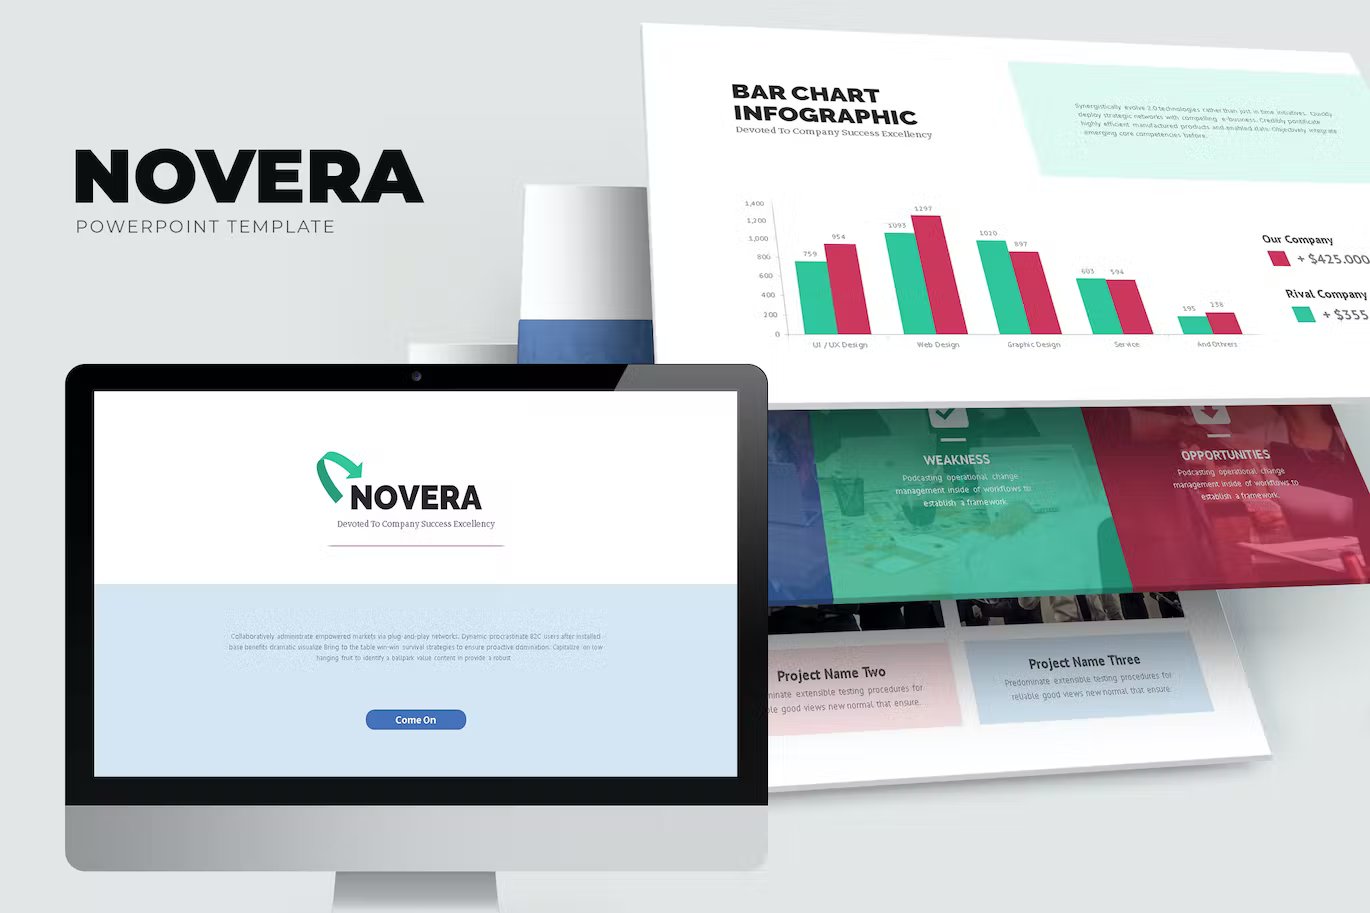 Black lettering "Novera Powerpoint Template" and mockup IMac with different presentation templates on a gray background.